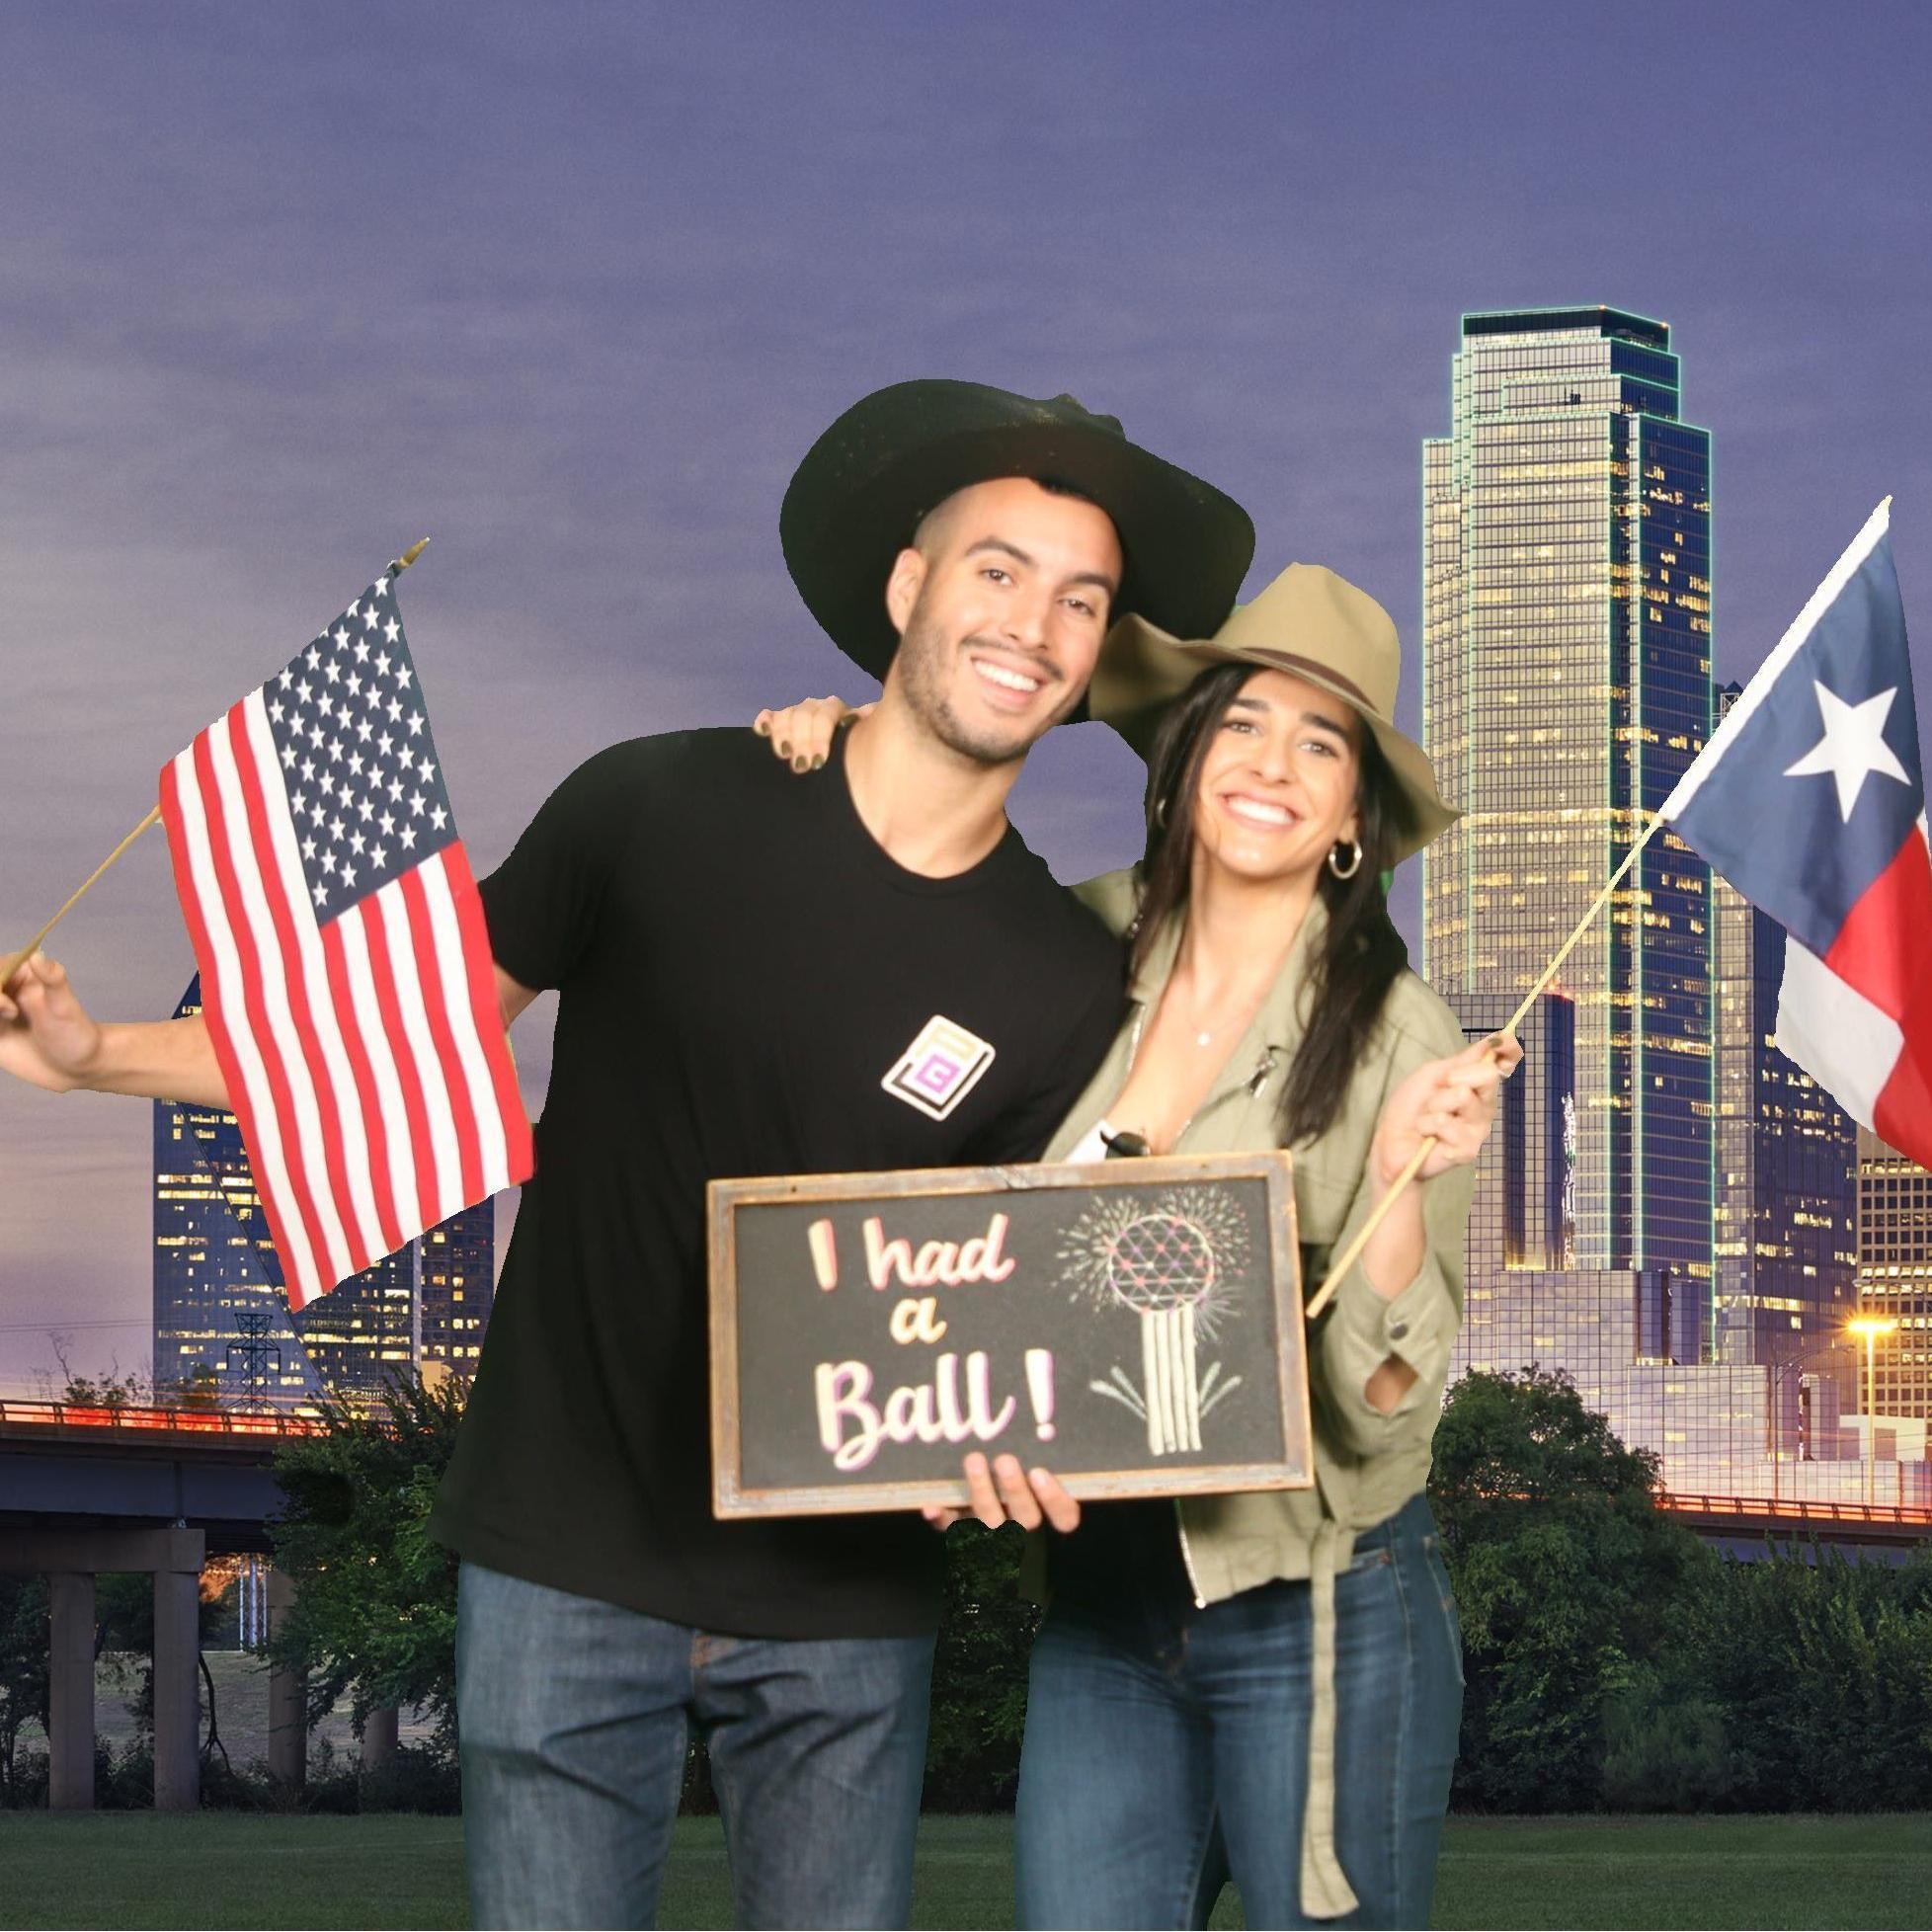 Sam & Liv met up in the most romantic city to celebrate Valentine's day in 2020 - Dallas, TX!